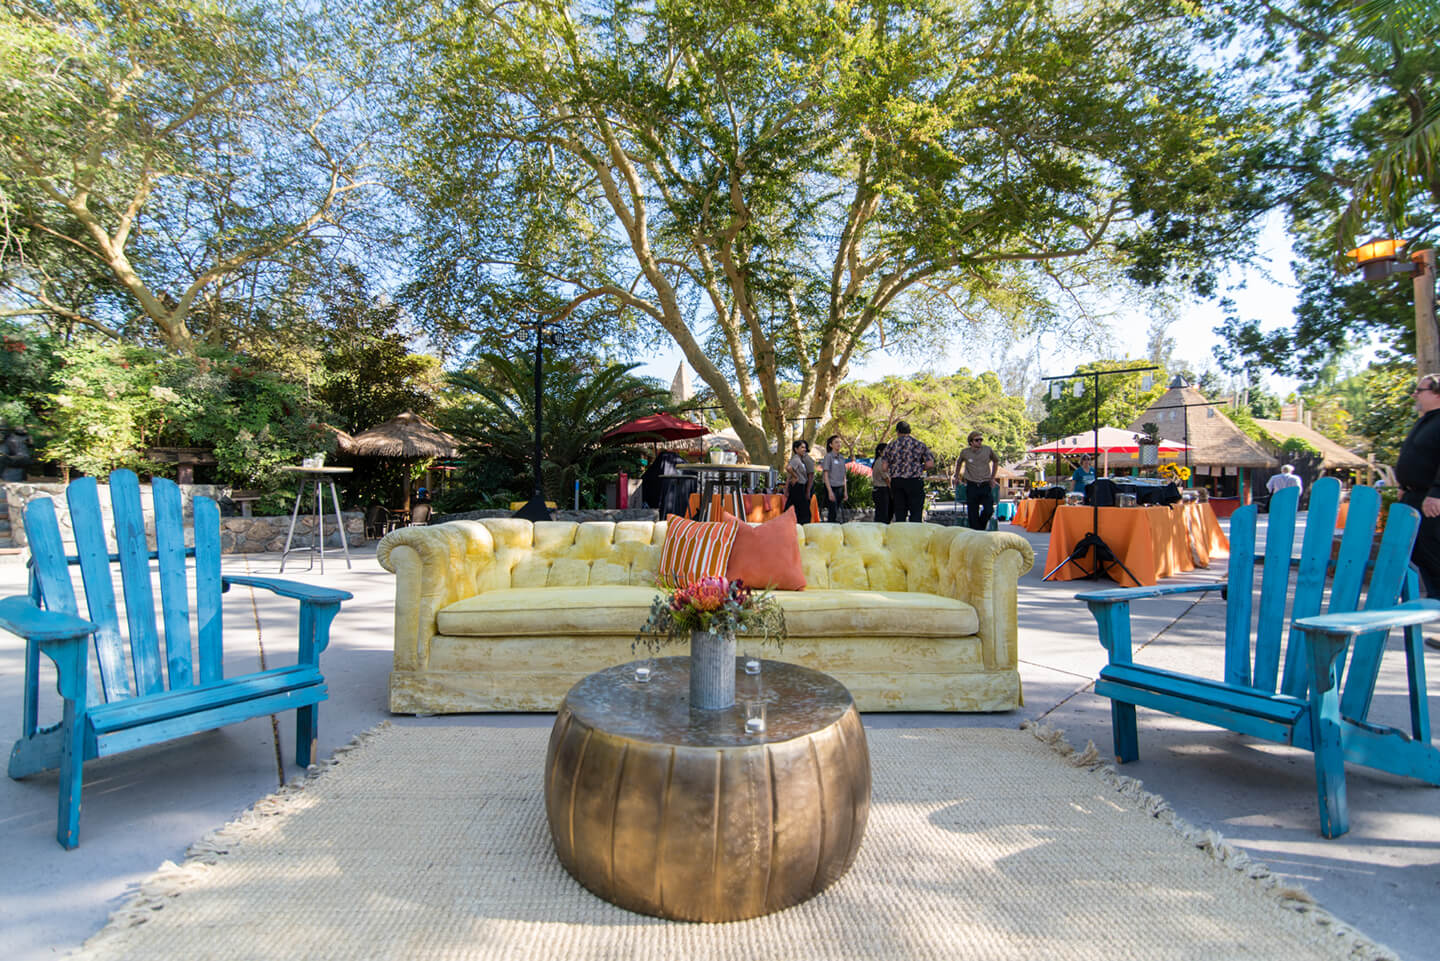 Lounge seating at Schroeder Plaza